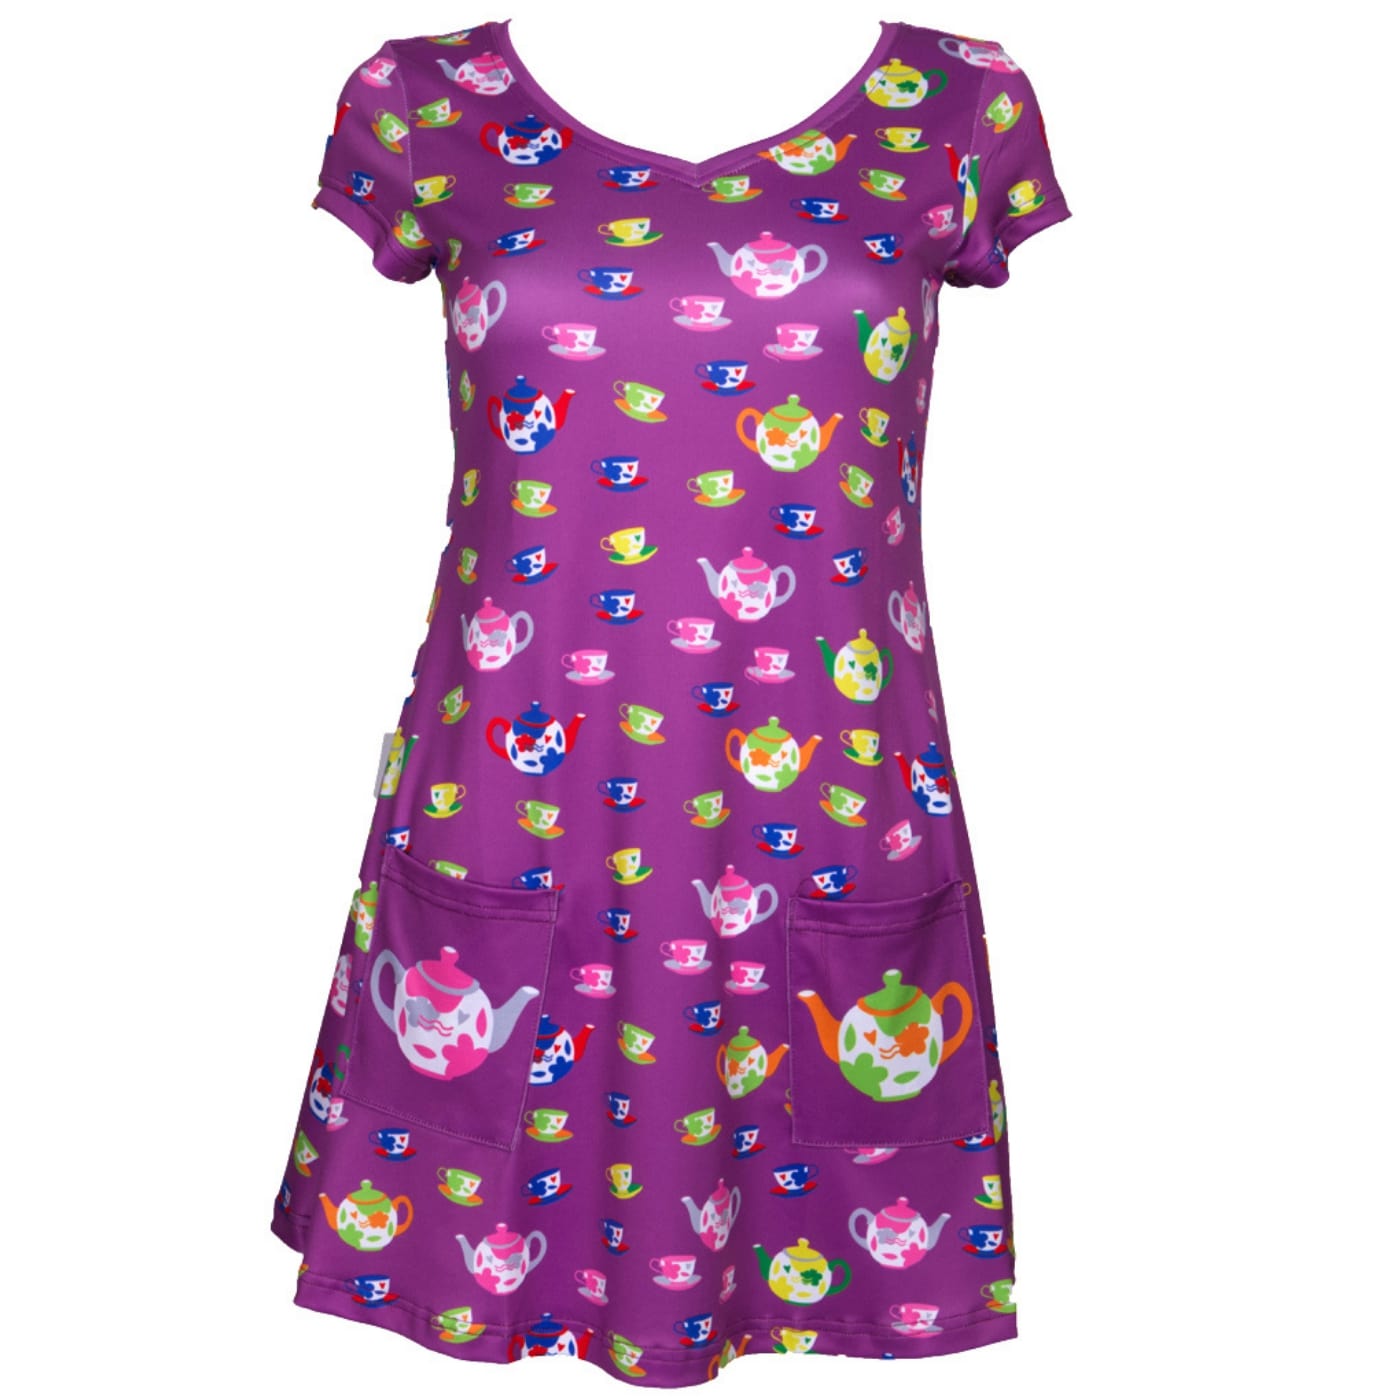 Tea Party Tunic Top by RainbowsAndFairies.com.au (Tea Cup - Teapot - Alice In Wonderland - Purple - Vintage Inspired - Kitsch - Top With Pockets) - SKU: CL_TUNIC_TEAPA_ORG- Pic-01